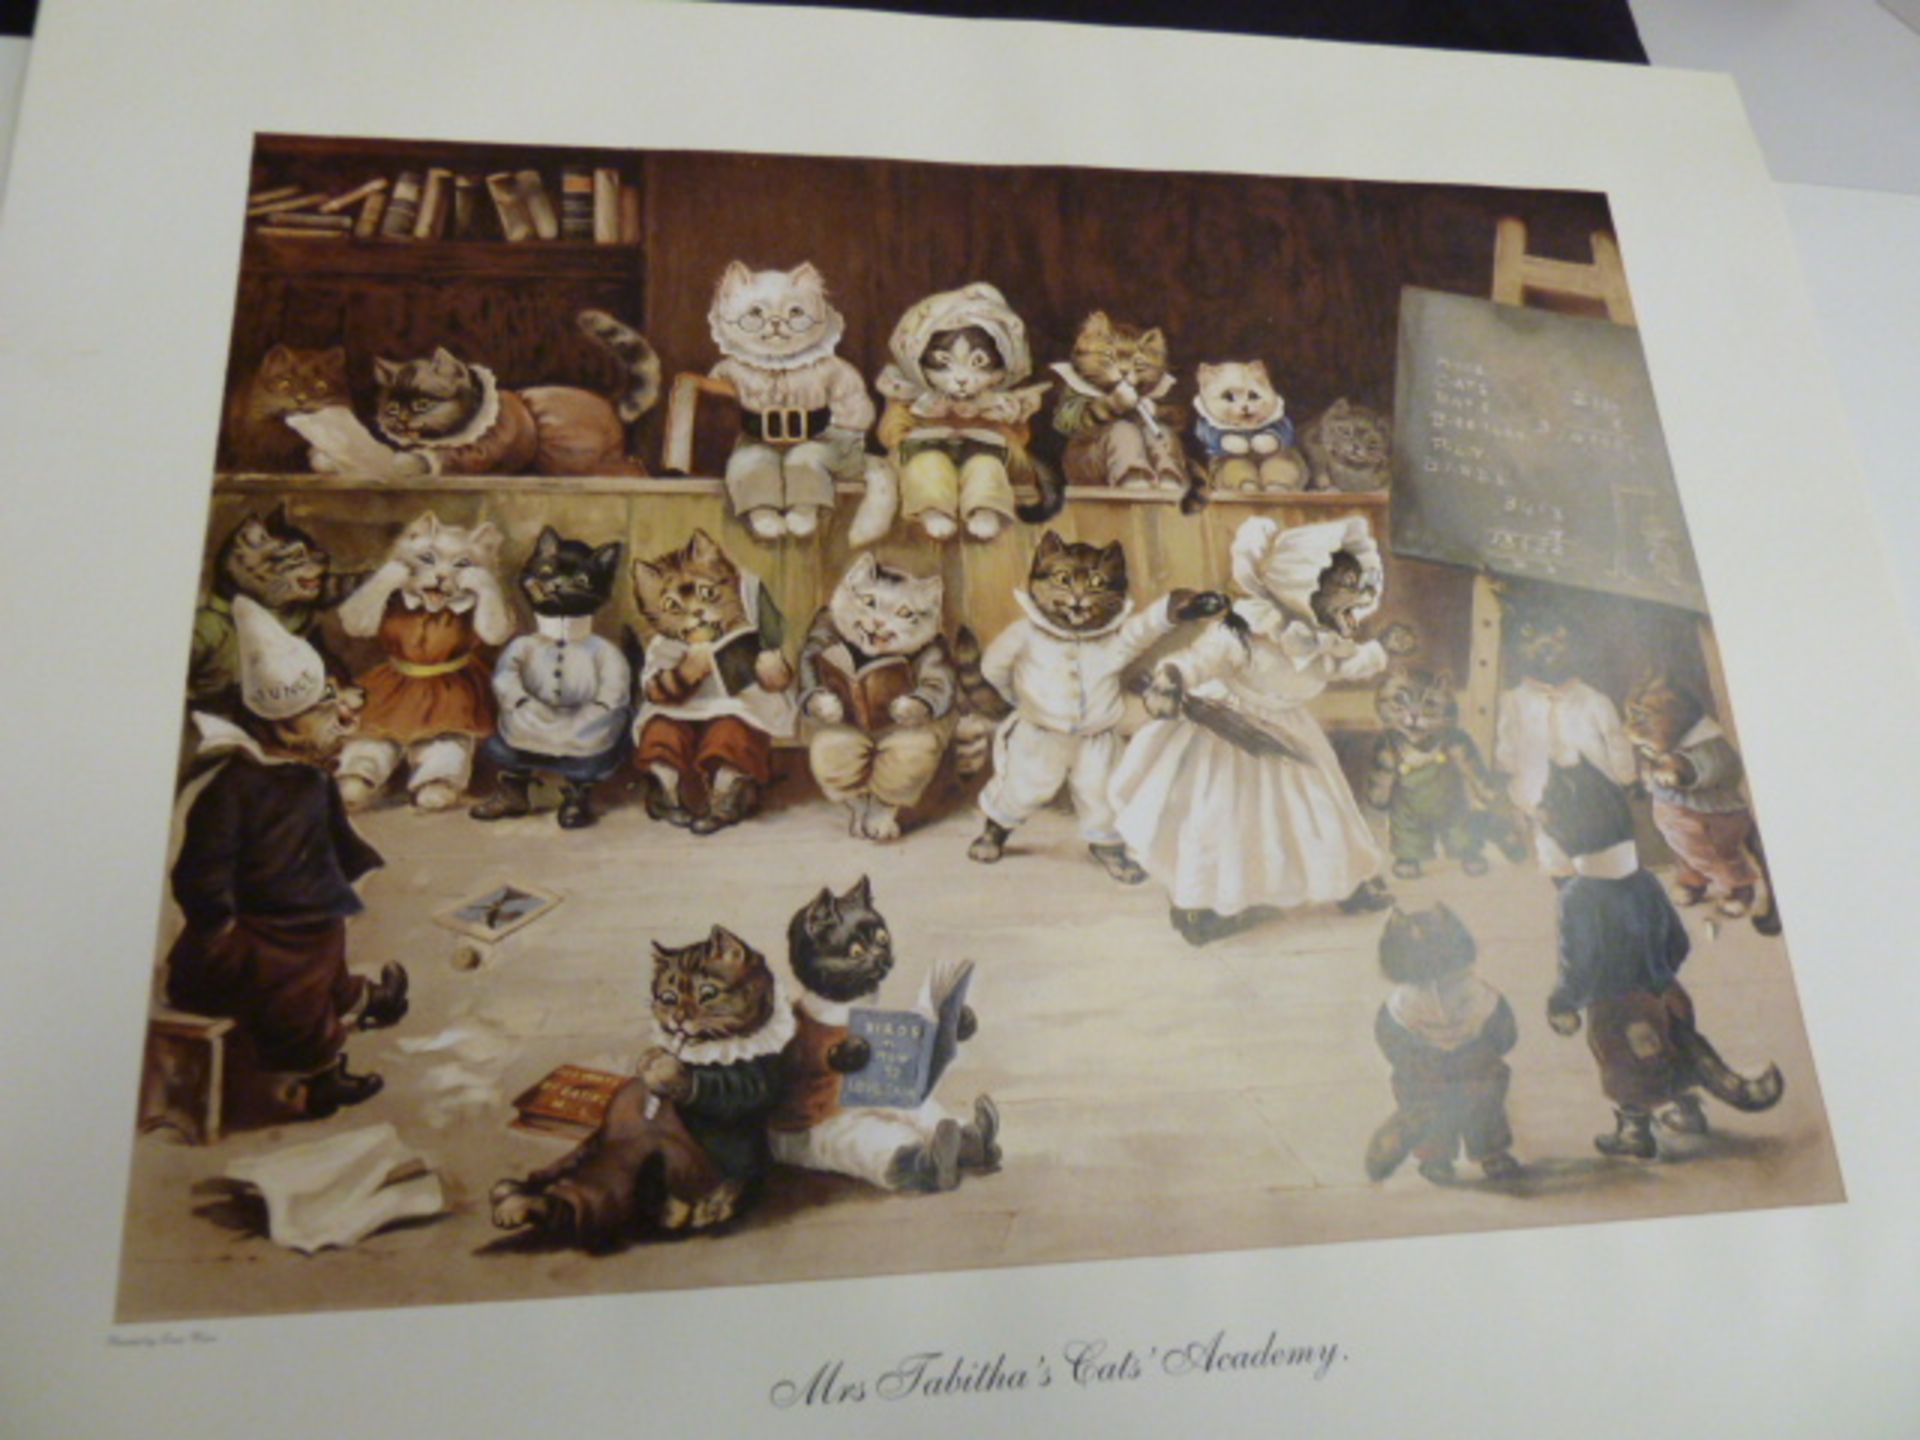 APPROX 200 UNMOUNTED PRINTS - MRS TABITHAS CATS ACADEMY BY LOUIS WAIN